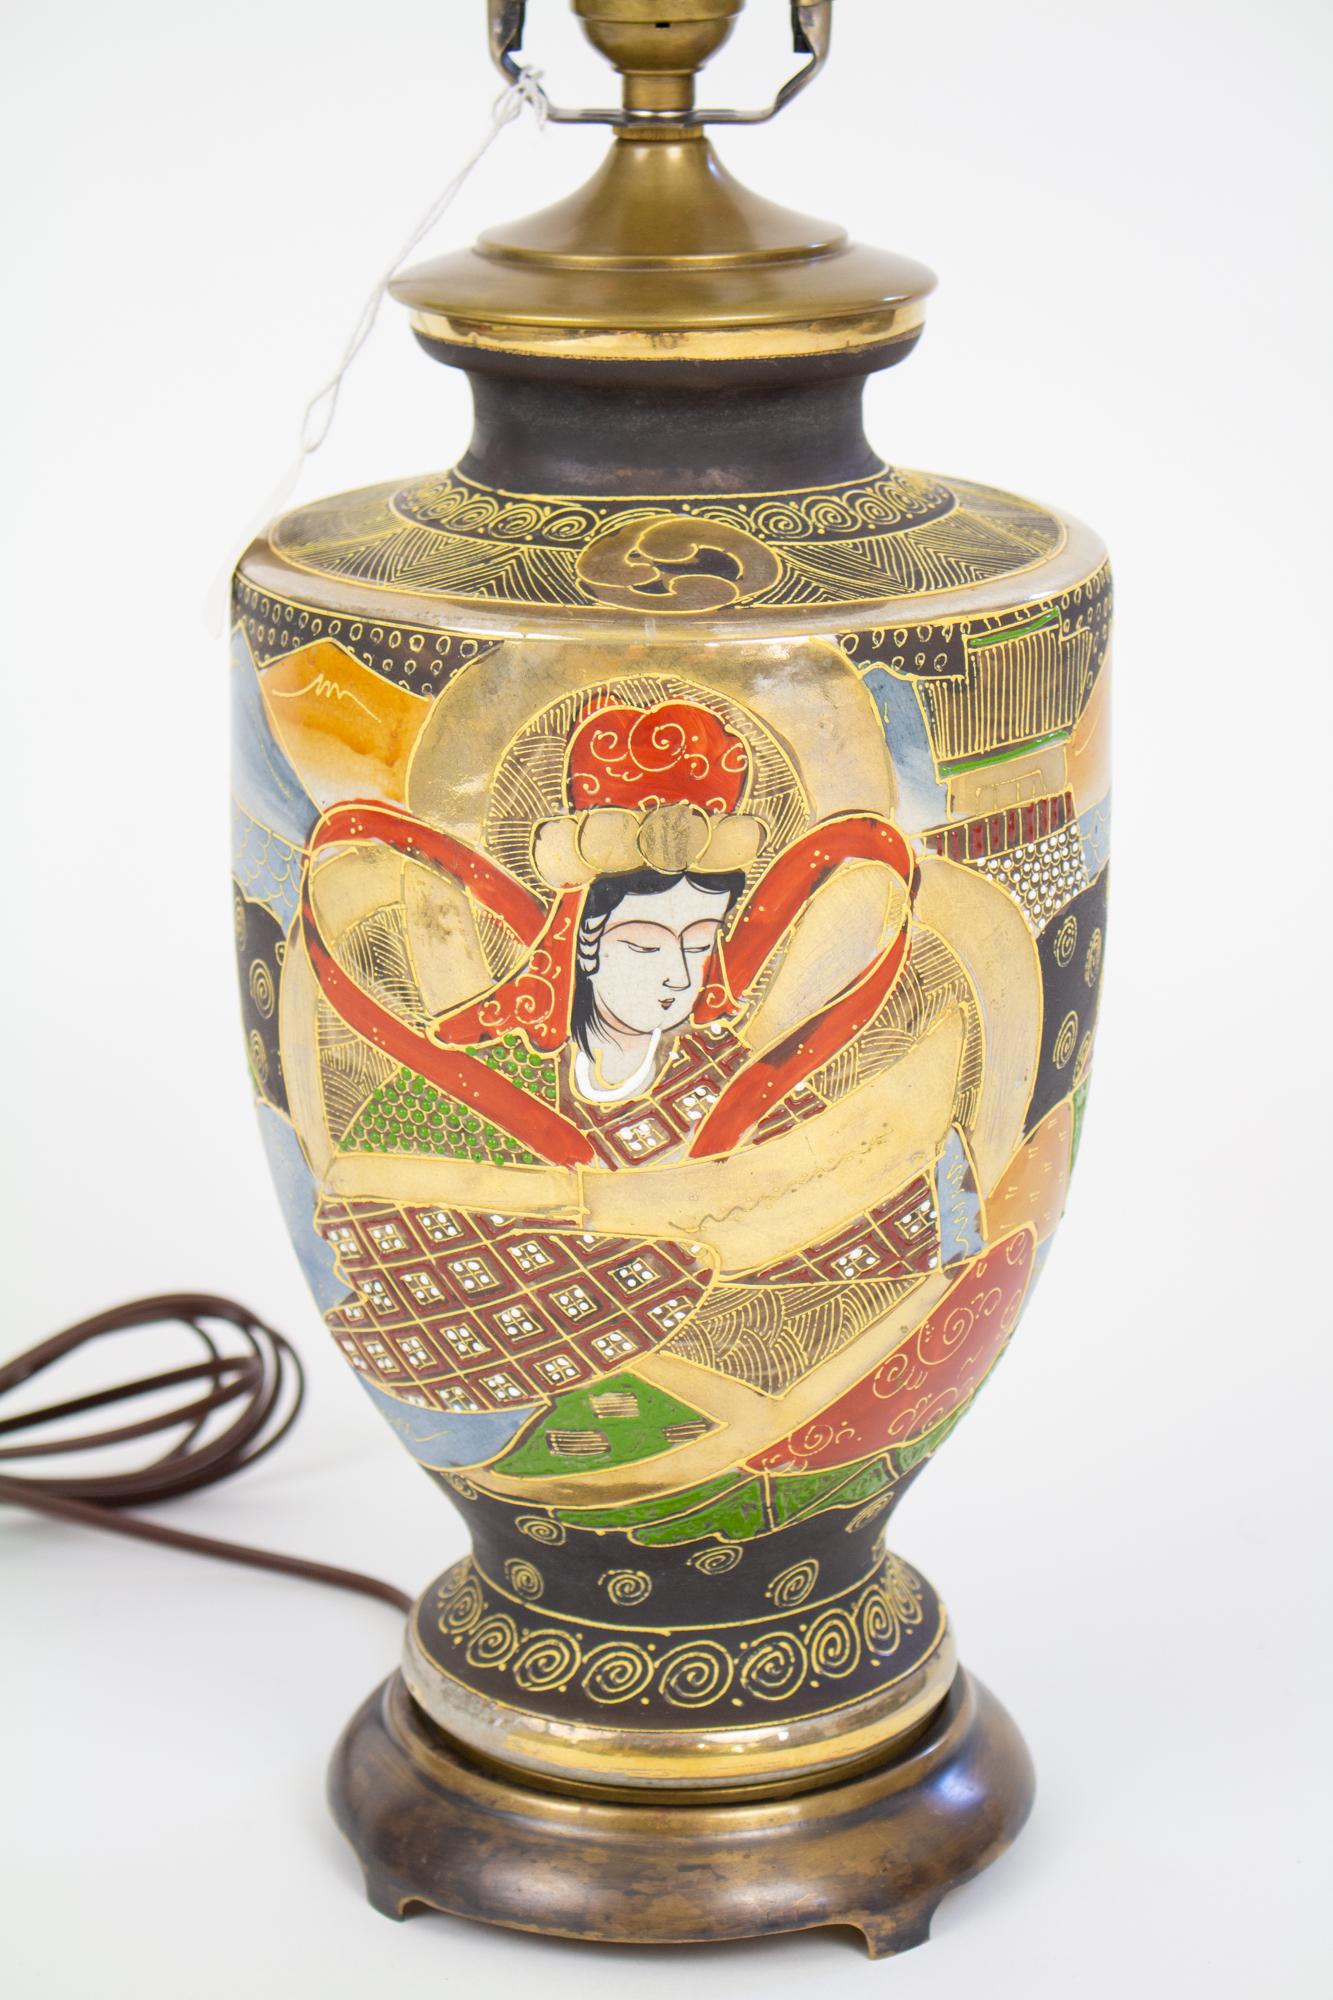 Mid 20th century satsuma table lamp. Features a woman and man in ornate traditional robes, with mountains ocean and a village in the background. Matte black base with red, green and blue details and raised gold accents. Includes harp. Condition: